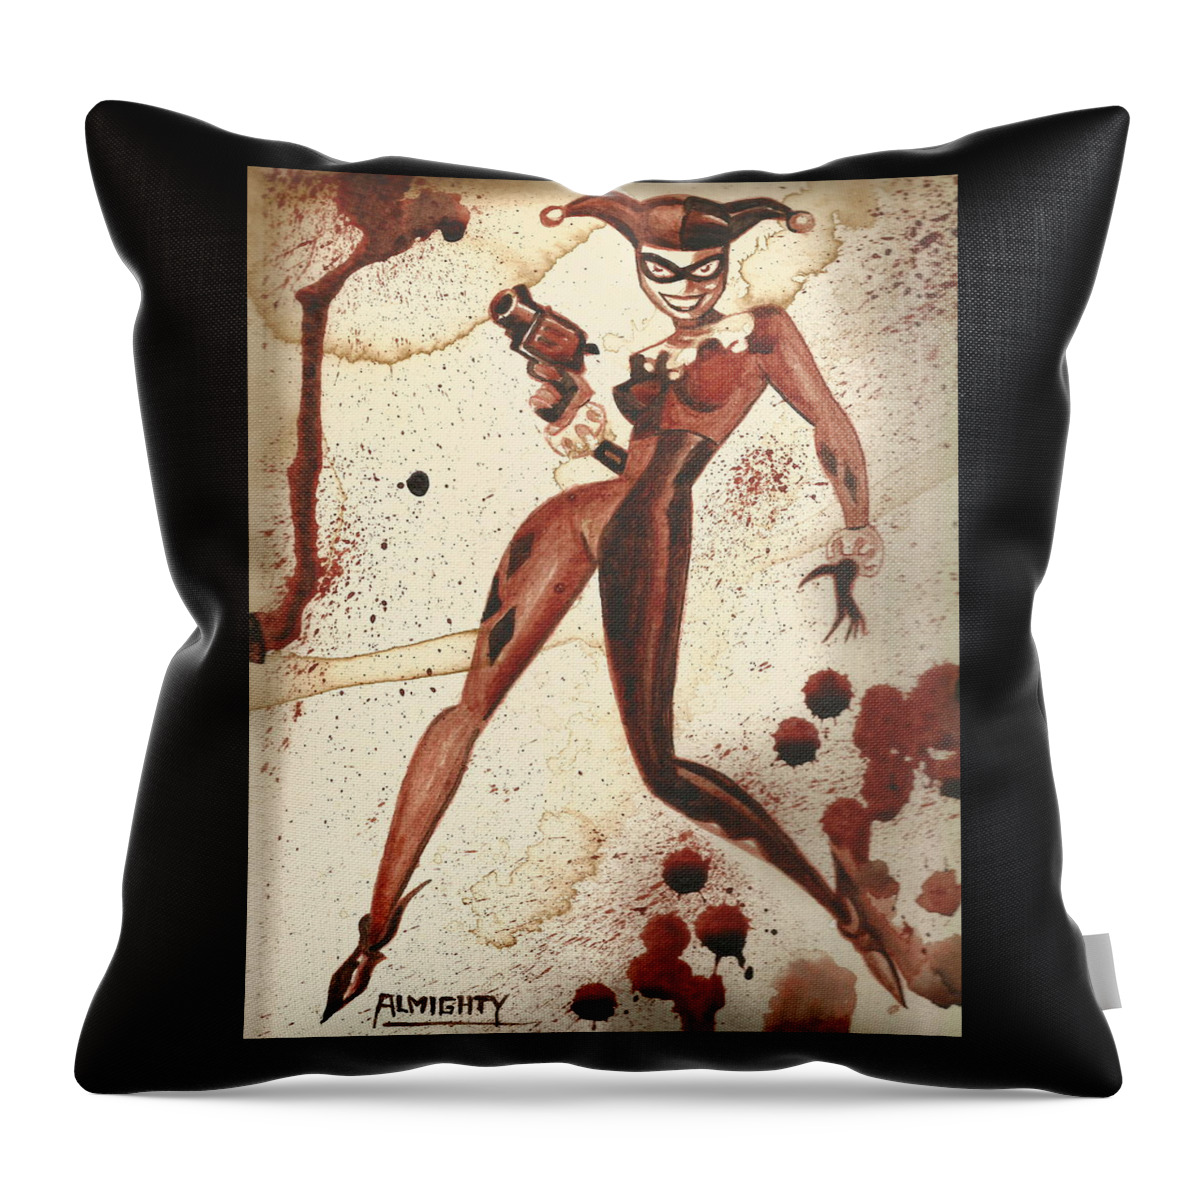 Ryan Almighty Throw Pillow featuring the painting HARLEY QUINN - dry blood by Ryan Almighty